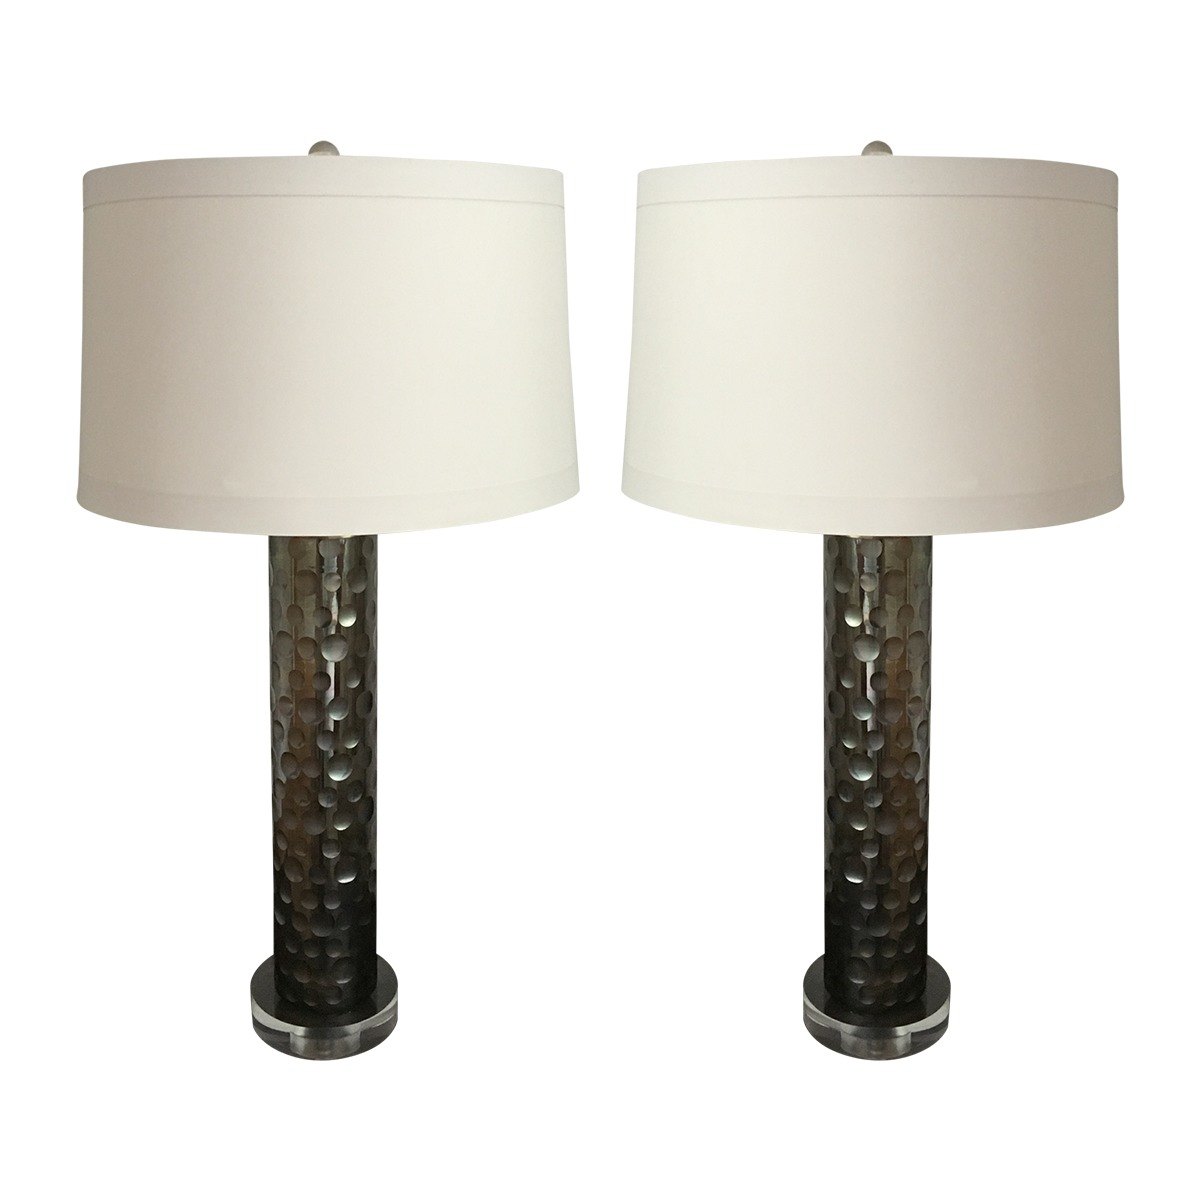 arteriors tanner and kenzie iridescent table lamps with lucite base accent sotheby home round patio chair outdoor nic tables half moon console nautical hanging lights campaign